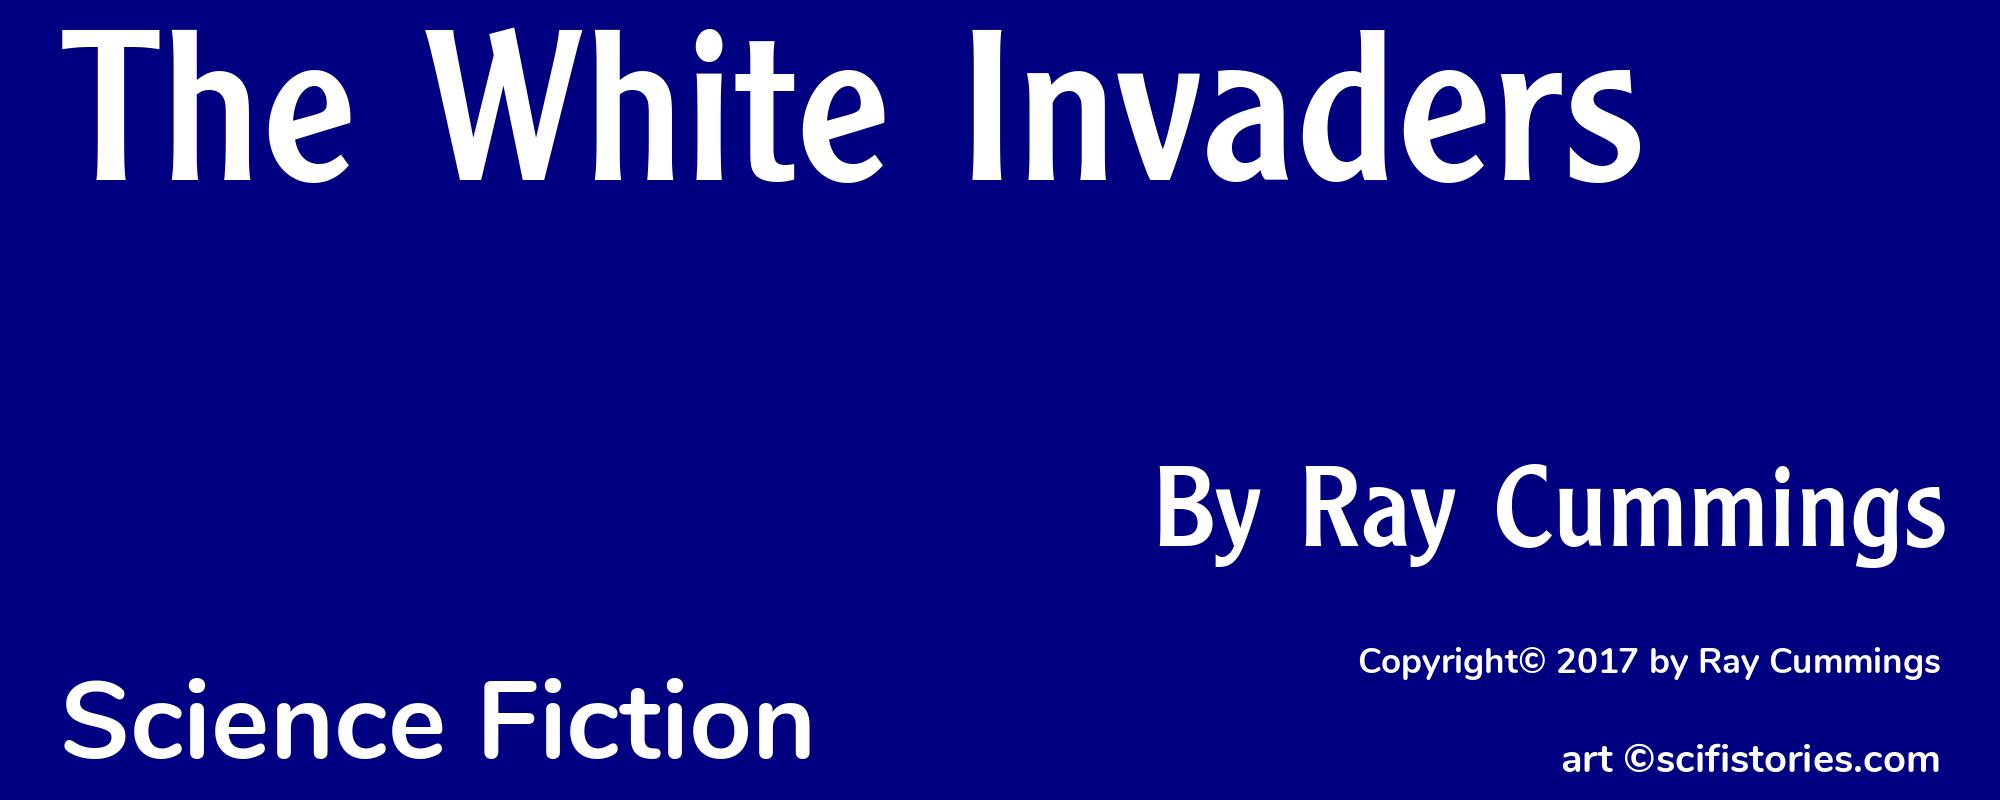 The White Invaders - Cover